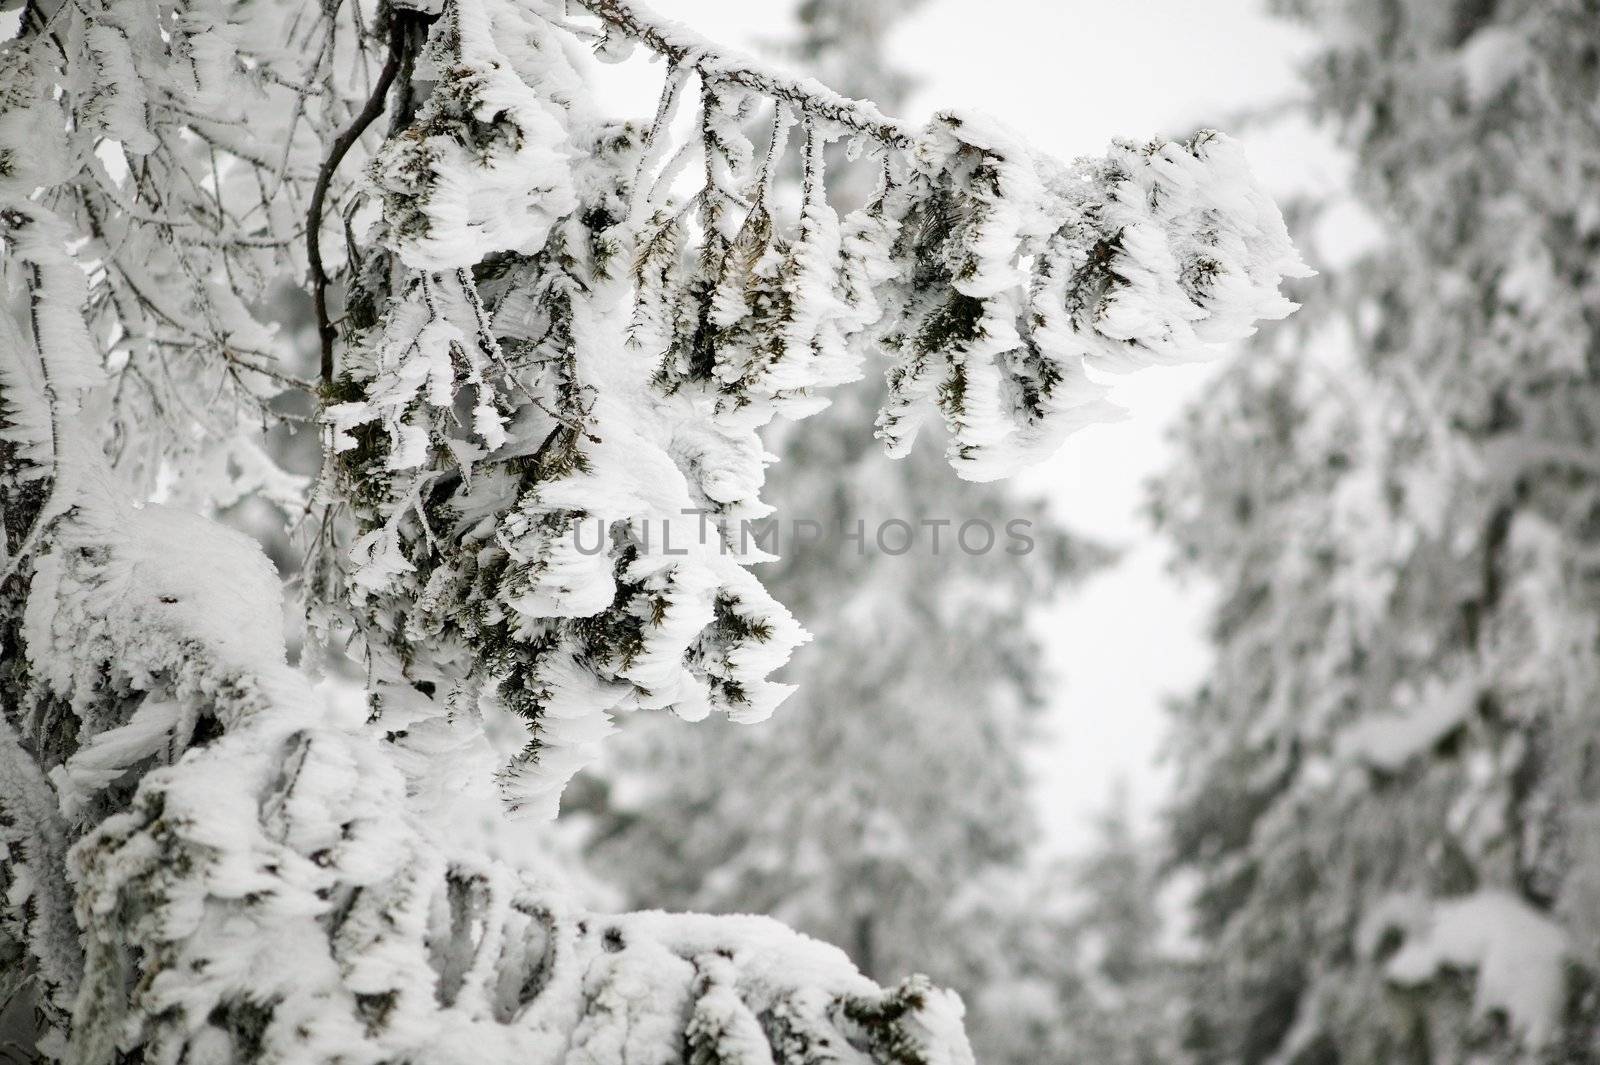 White winter texture and mood image.  A winter setting with lots of snow.